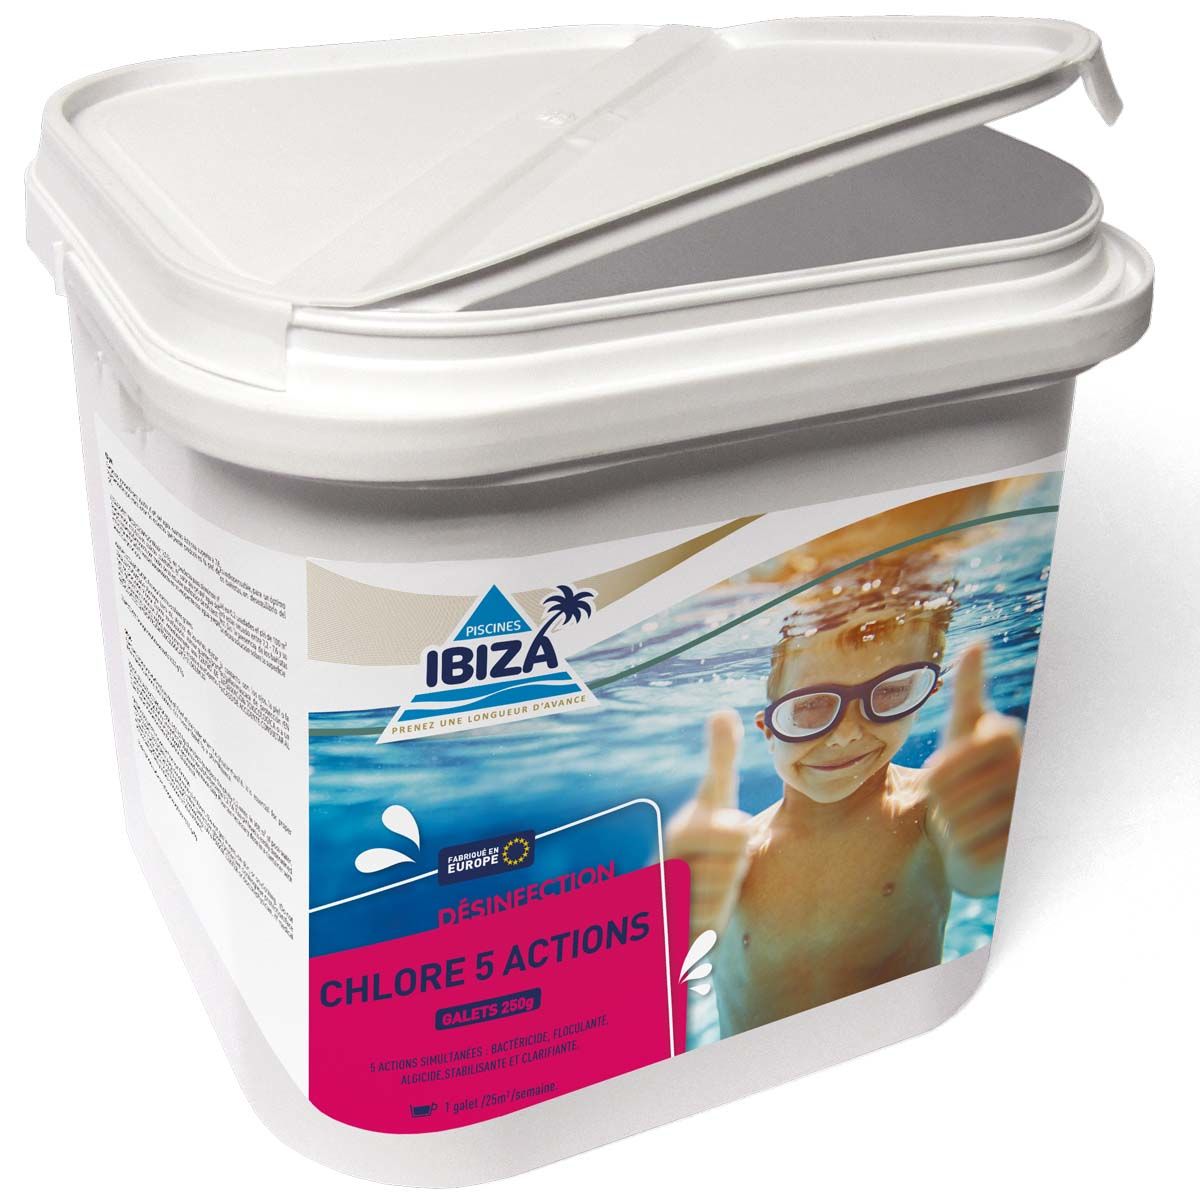 chlore-5-actions-piscines-ibiza-galet-250g-5kg-low-boric-2022